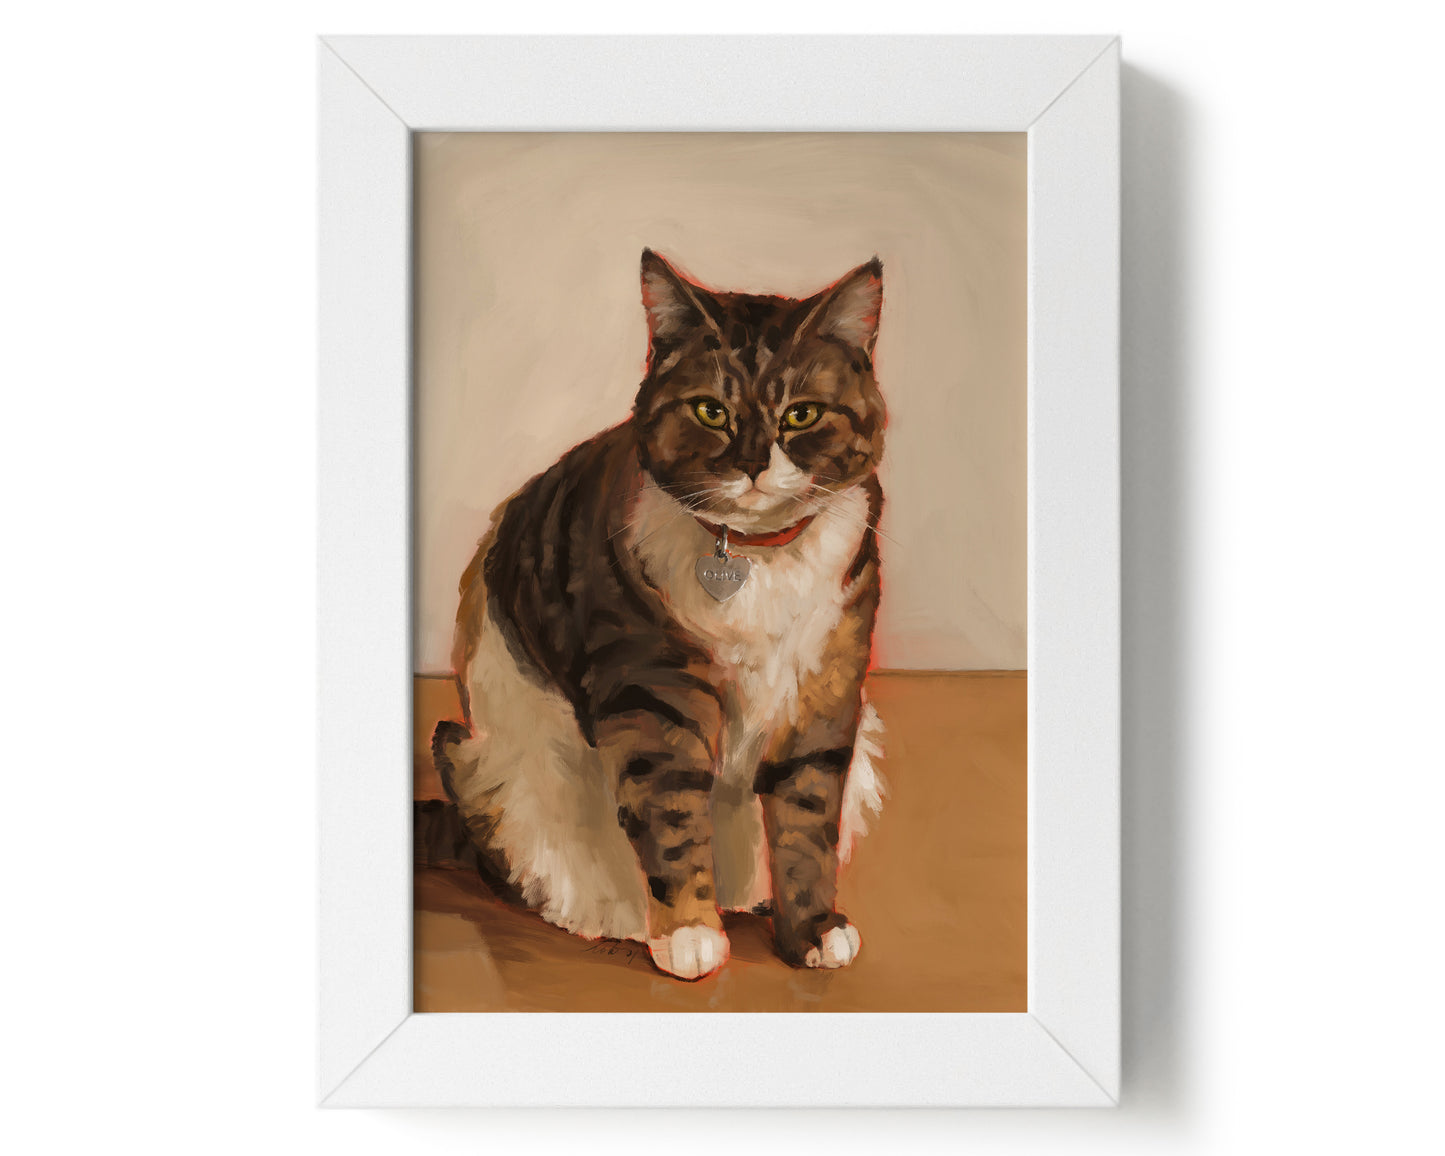 "Olive" by Catherine Hébert - Brown and White Tabby Cat Art Print - 5"x7" size